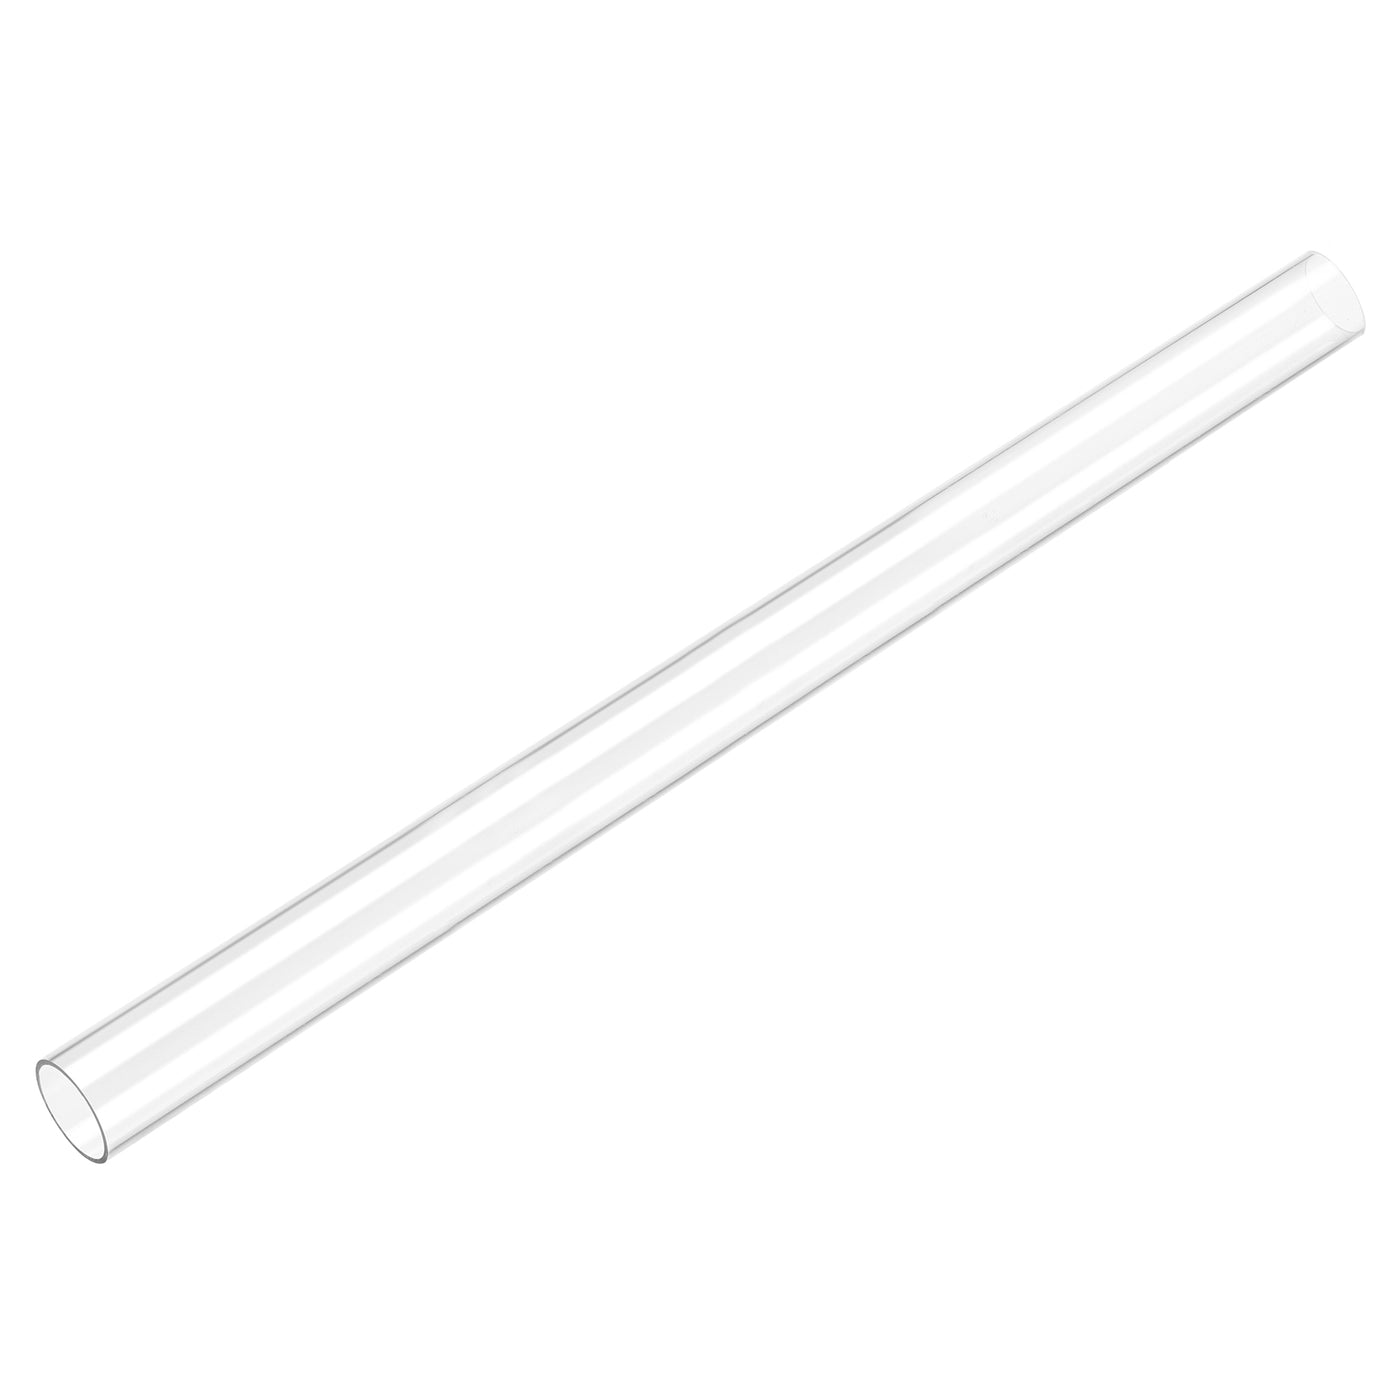 Uxcell Uxcell PC Rigid Round Clear Tubing 47mm(1.85 Inch)IDx50mm(1.97 Inch)ODx500mm(1.64Ft) Length Plastic Tube